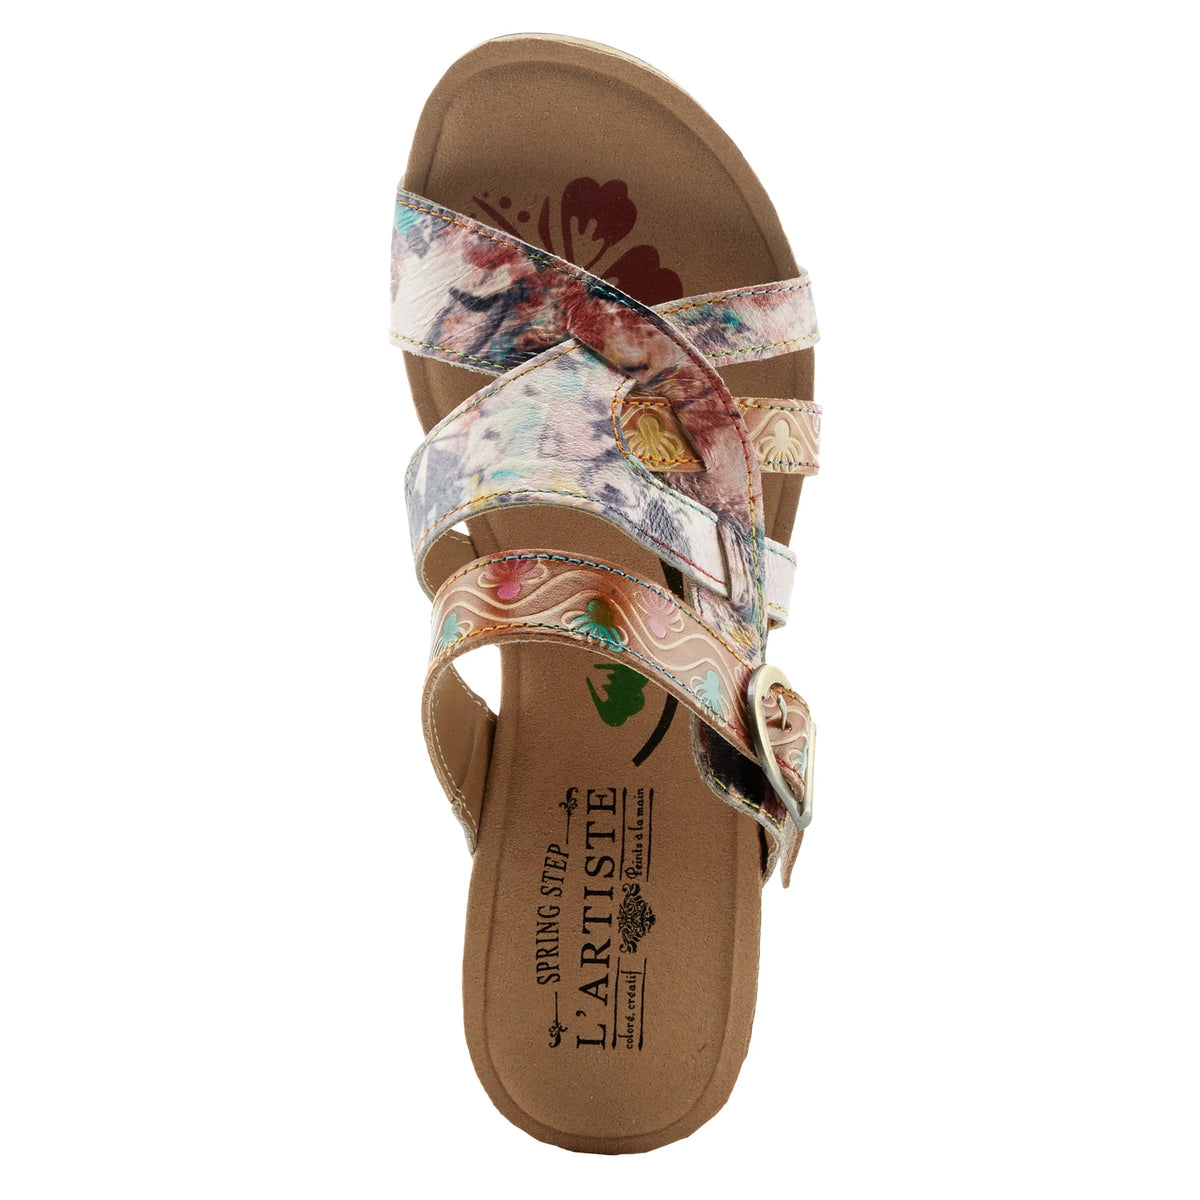 SpringStep Shoes Spring Step Footwear L`Artiste Style: BAOCIRE  French inspired multi strapped slide sandal with beautiful hand-painted and embossed florals and swirls on premium leather. Featuring an adjustable top strap with an antique brass buckle, asymmetrical manmade intertwined floral rainbow stitched straps, on an all-day comfortable super padded footbed and cork wrapped wedge.